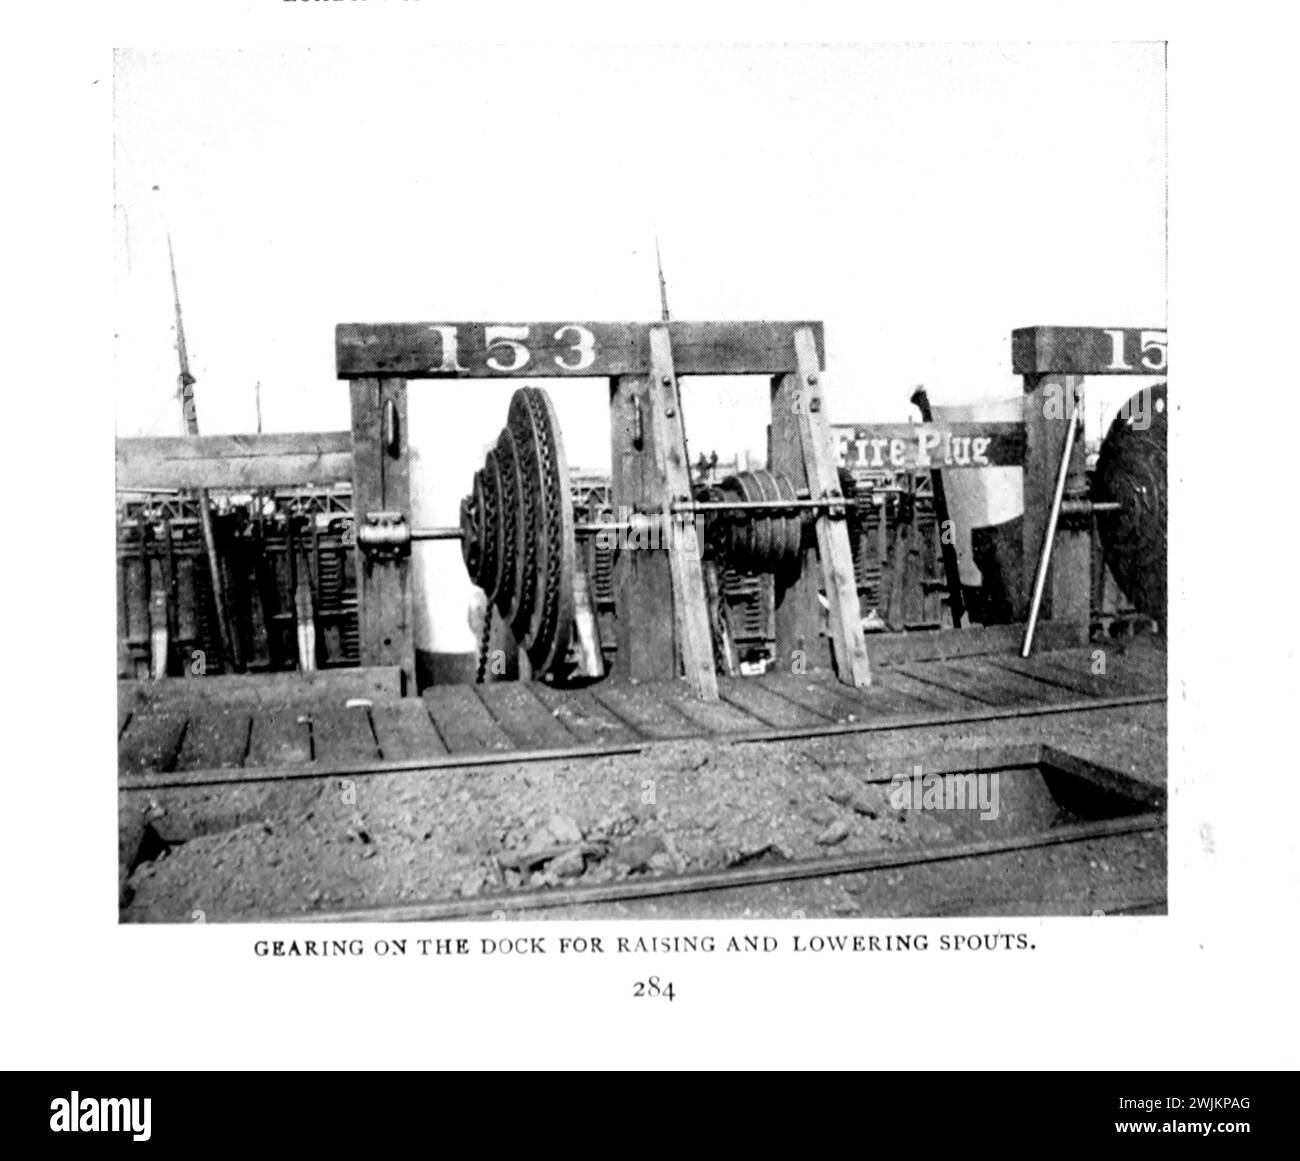 Gearing on the dock for raising and lowering spouts from the Article IRON-ORE LOADING ON THE AMERICAN GREAT LAKES. By H. J. Stifer. from The Engineering Magazine Devoted to Industrial Progress Volume XIV October 1897 - March 1898 The Engineering Magazine Co Stock Photo